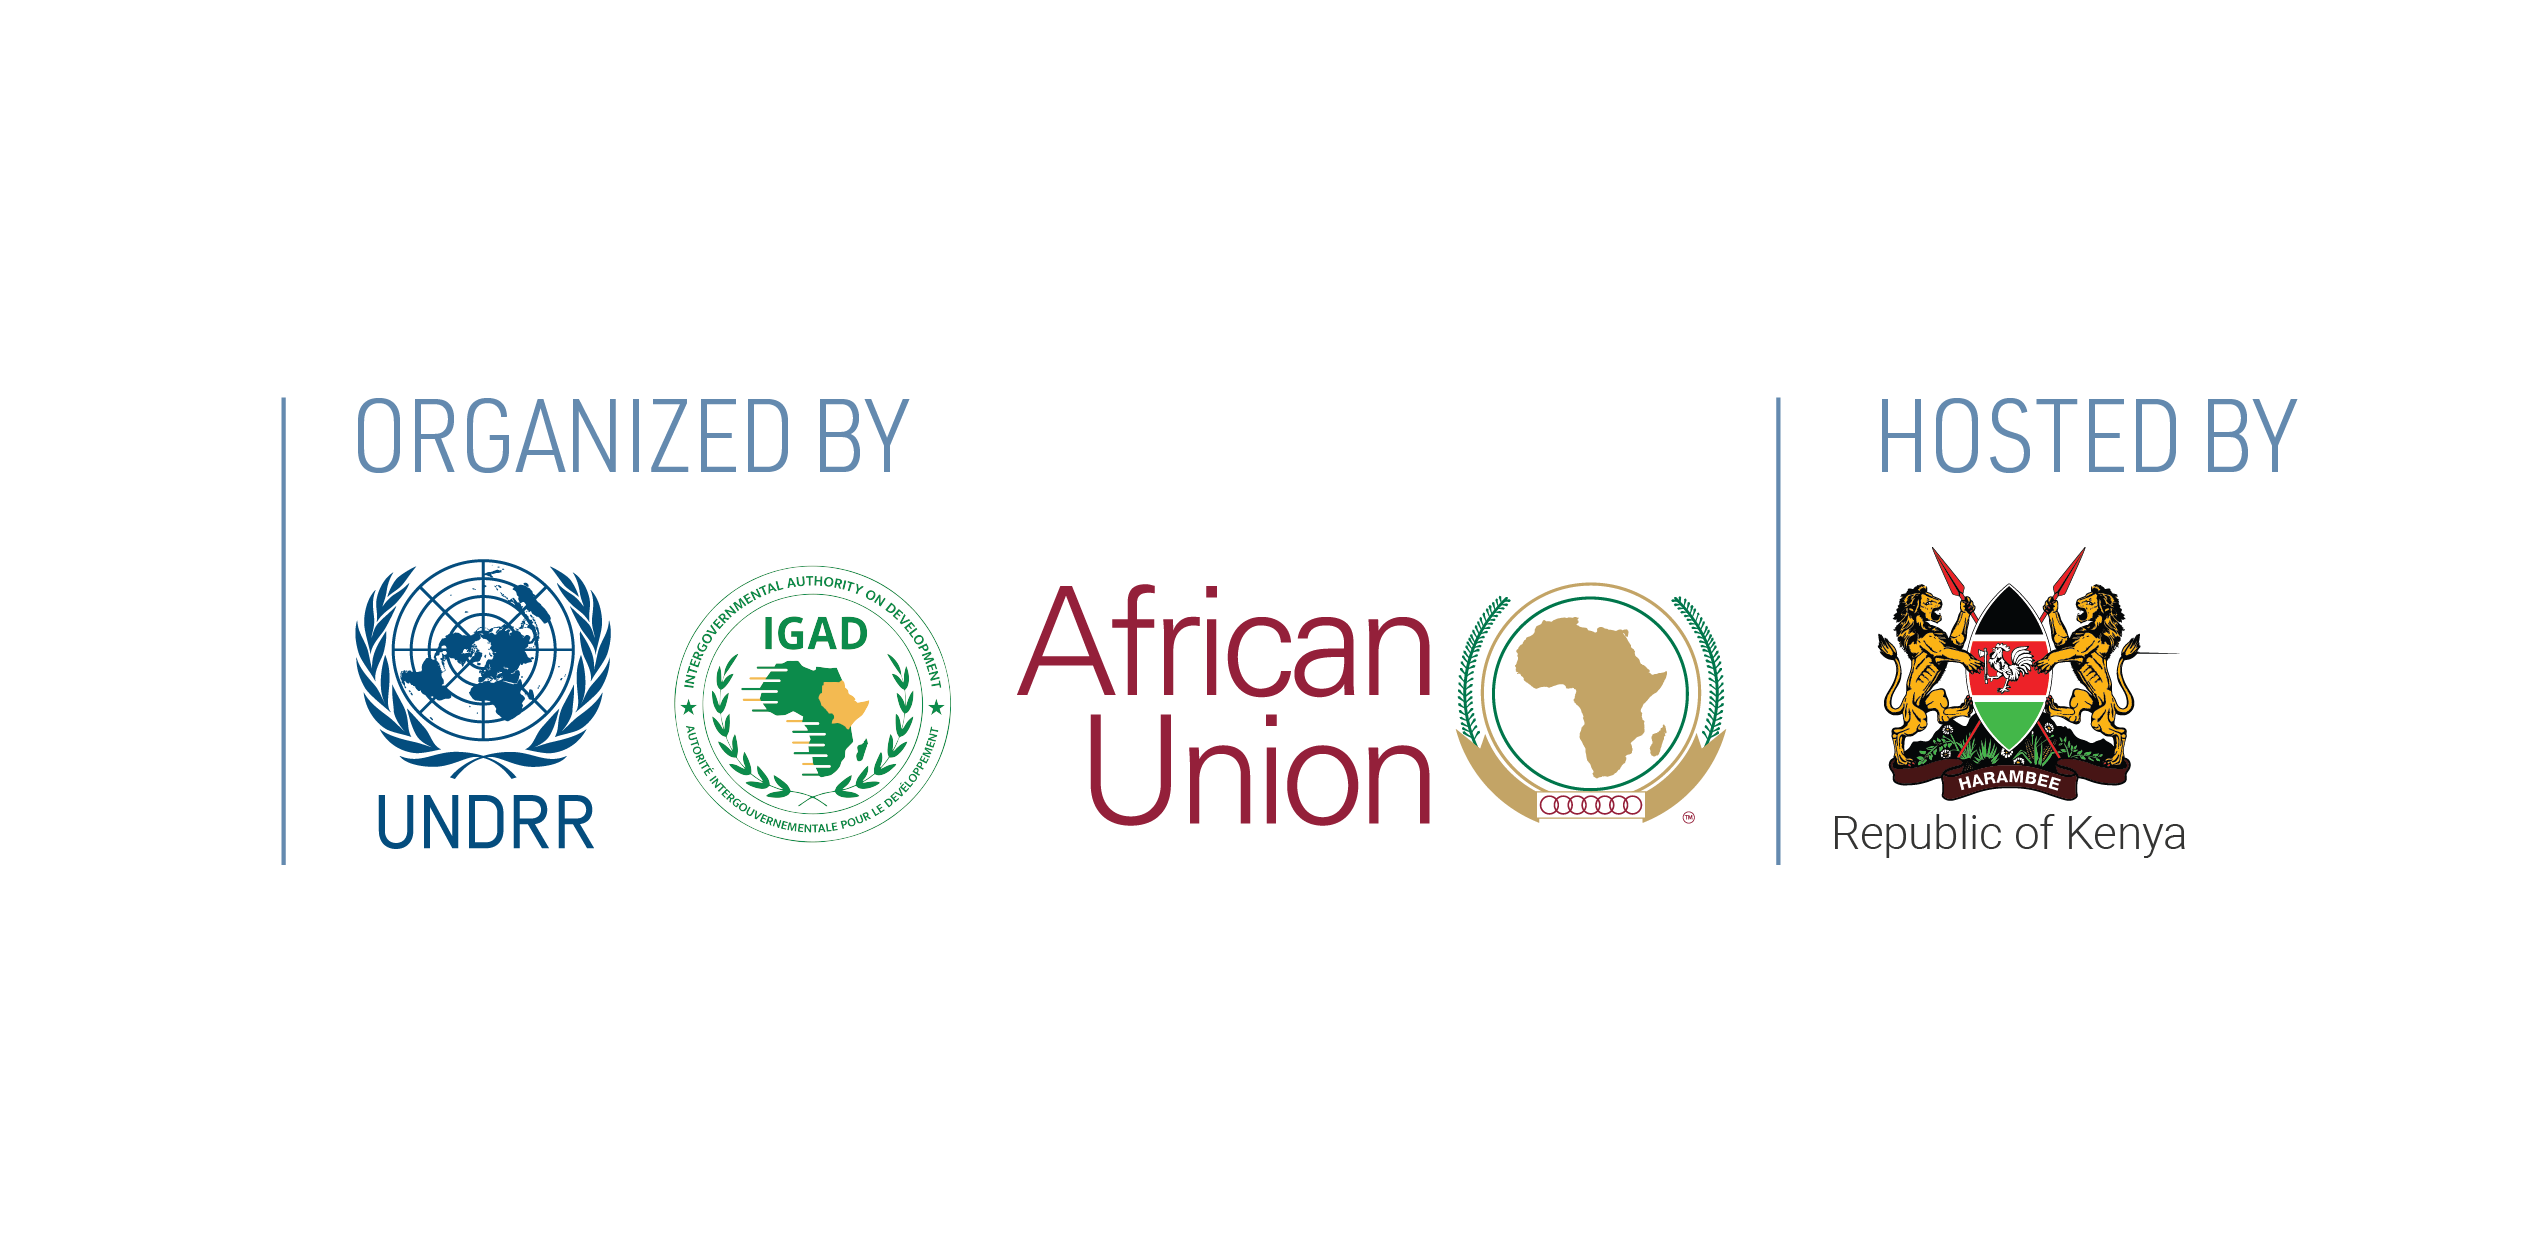 logos of the organizers and the host country